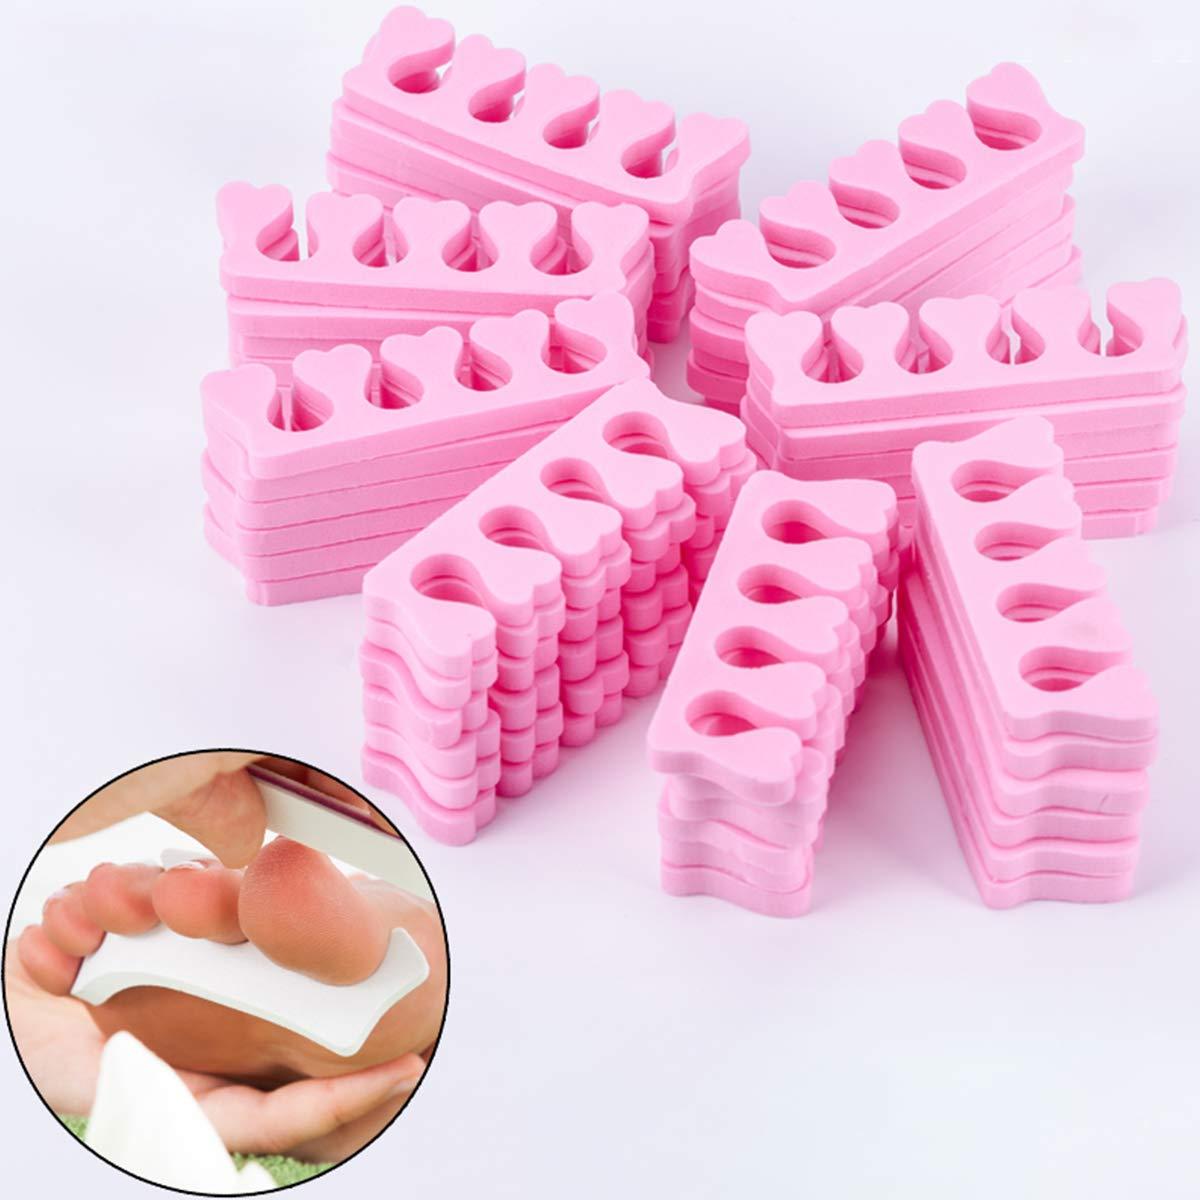  Beavorty 18 pcs Silicone Toe Spacers silicone nail separators  nail tool nail art kit finger separation tool DIY toe spacers nail polish  toe separators flower Straightener Miss manicure : Beauty